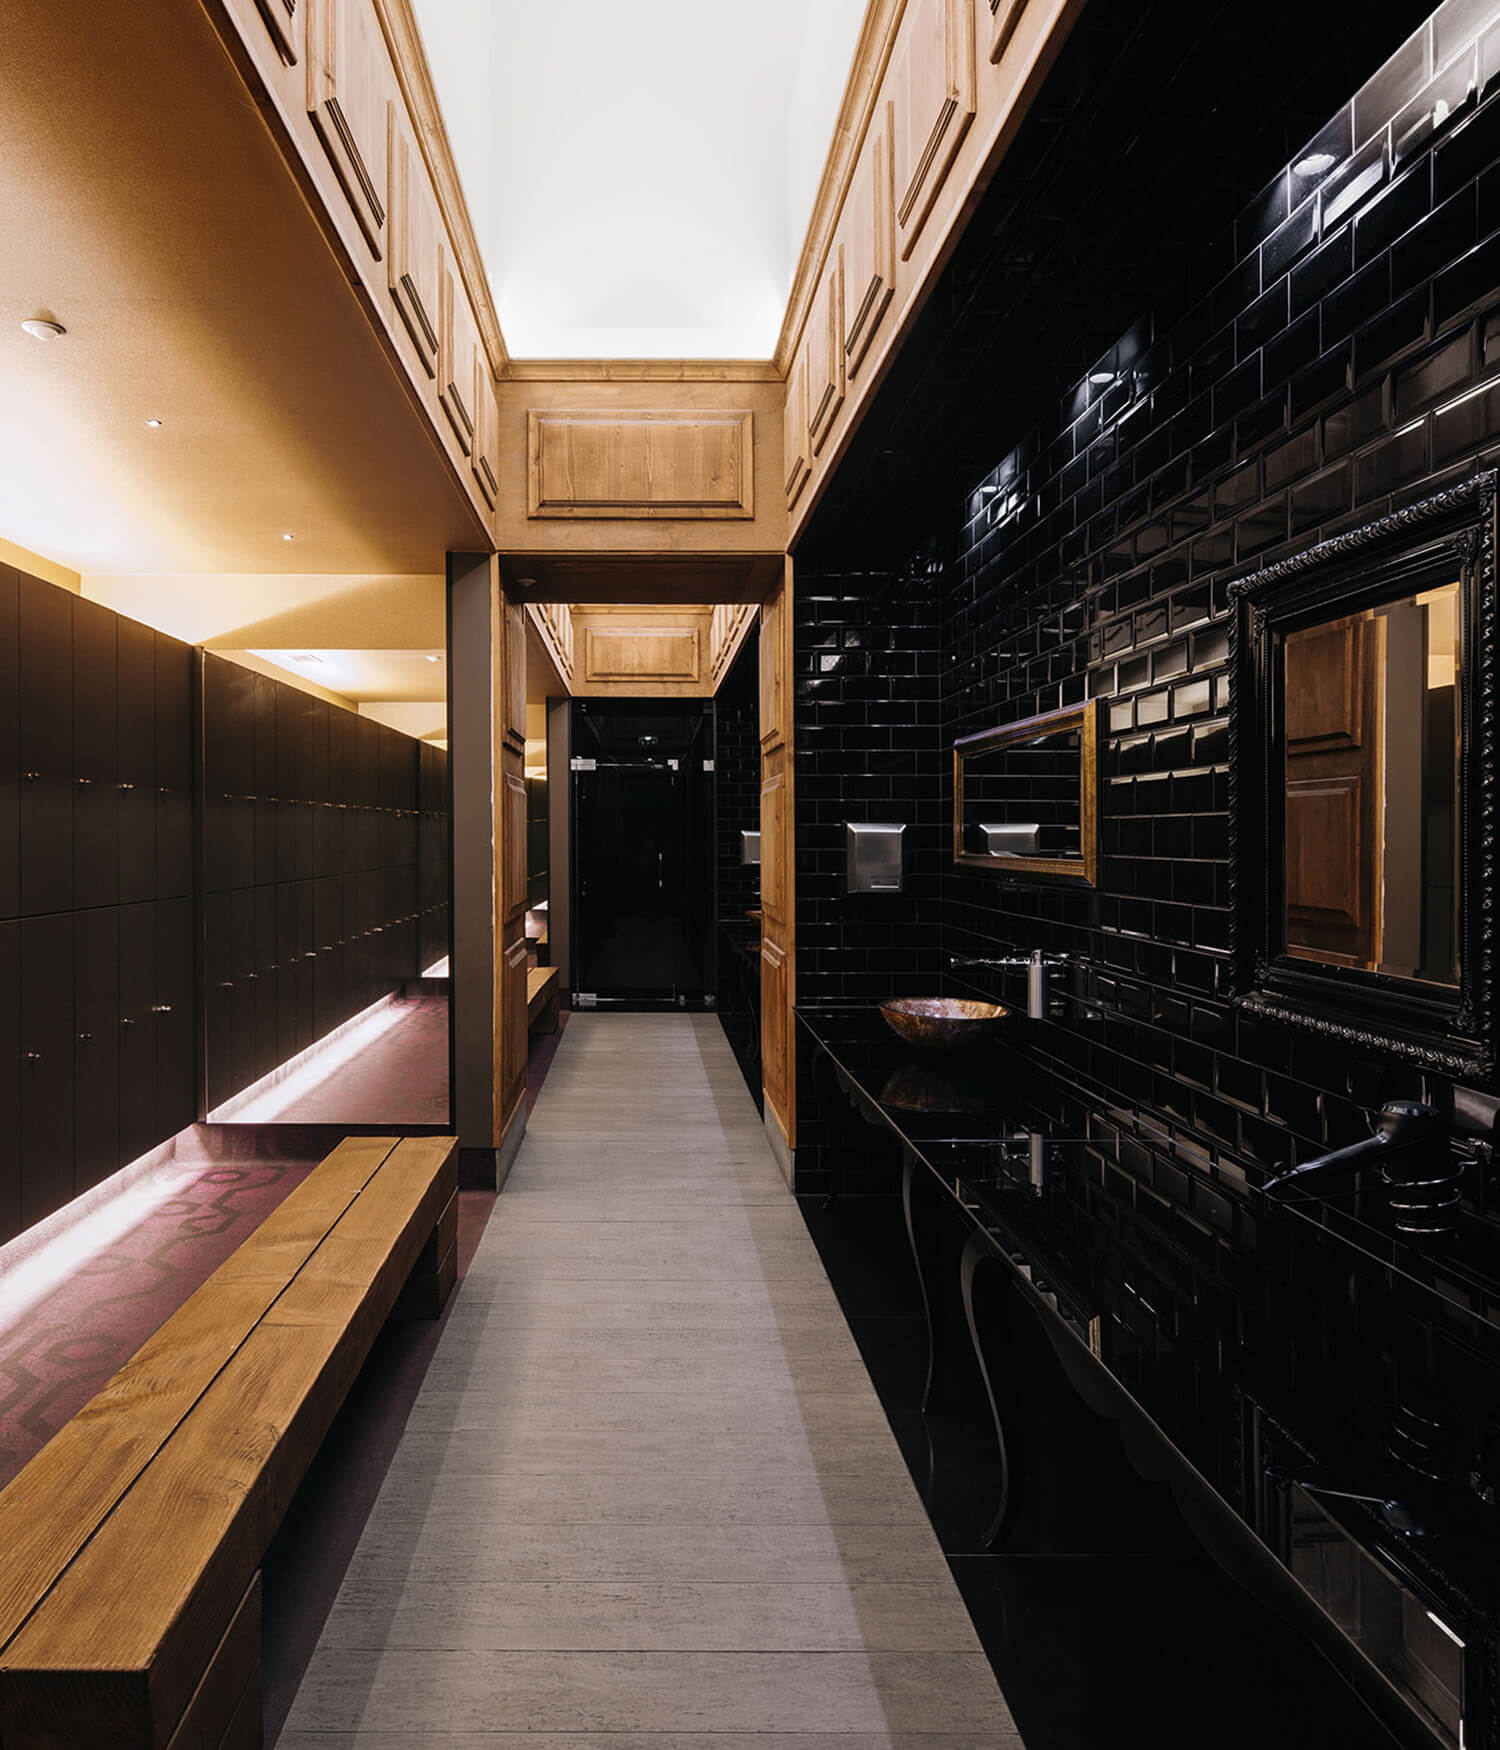 Perspective of the corridor contiguous to the lavatories and dryers, on the right, and to the dressing area of mirrored walls and backlit lockers, on the left.